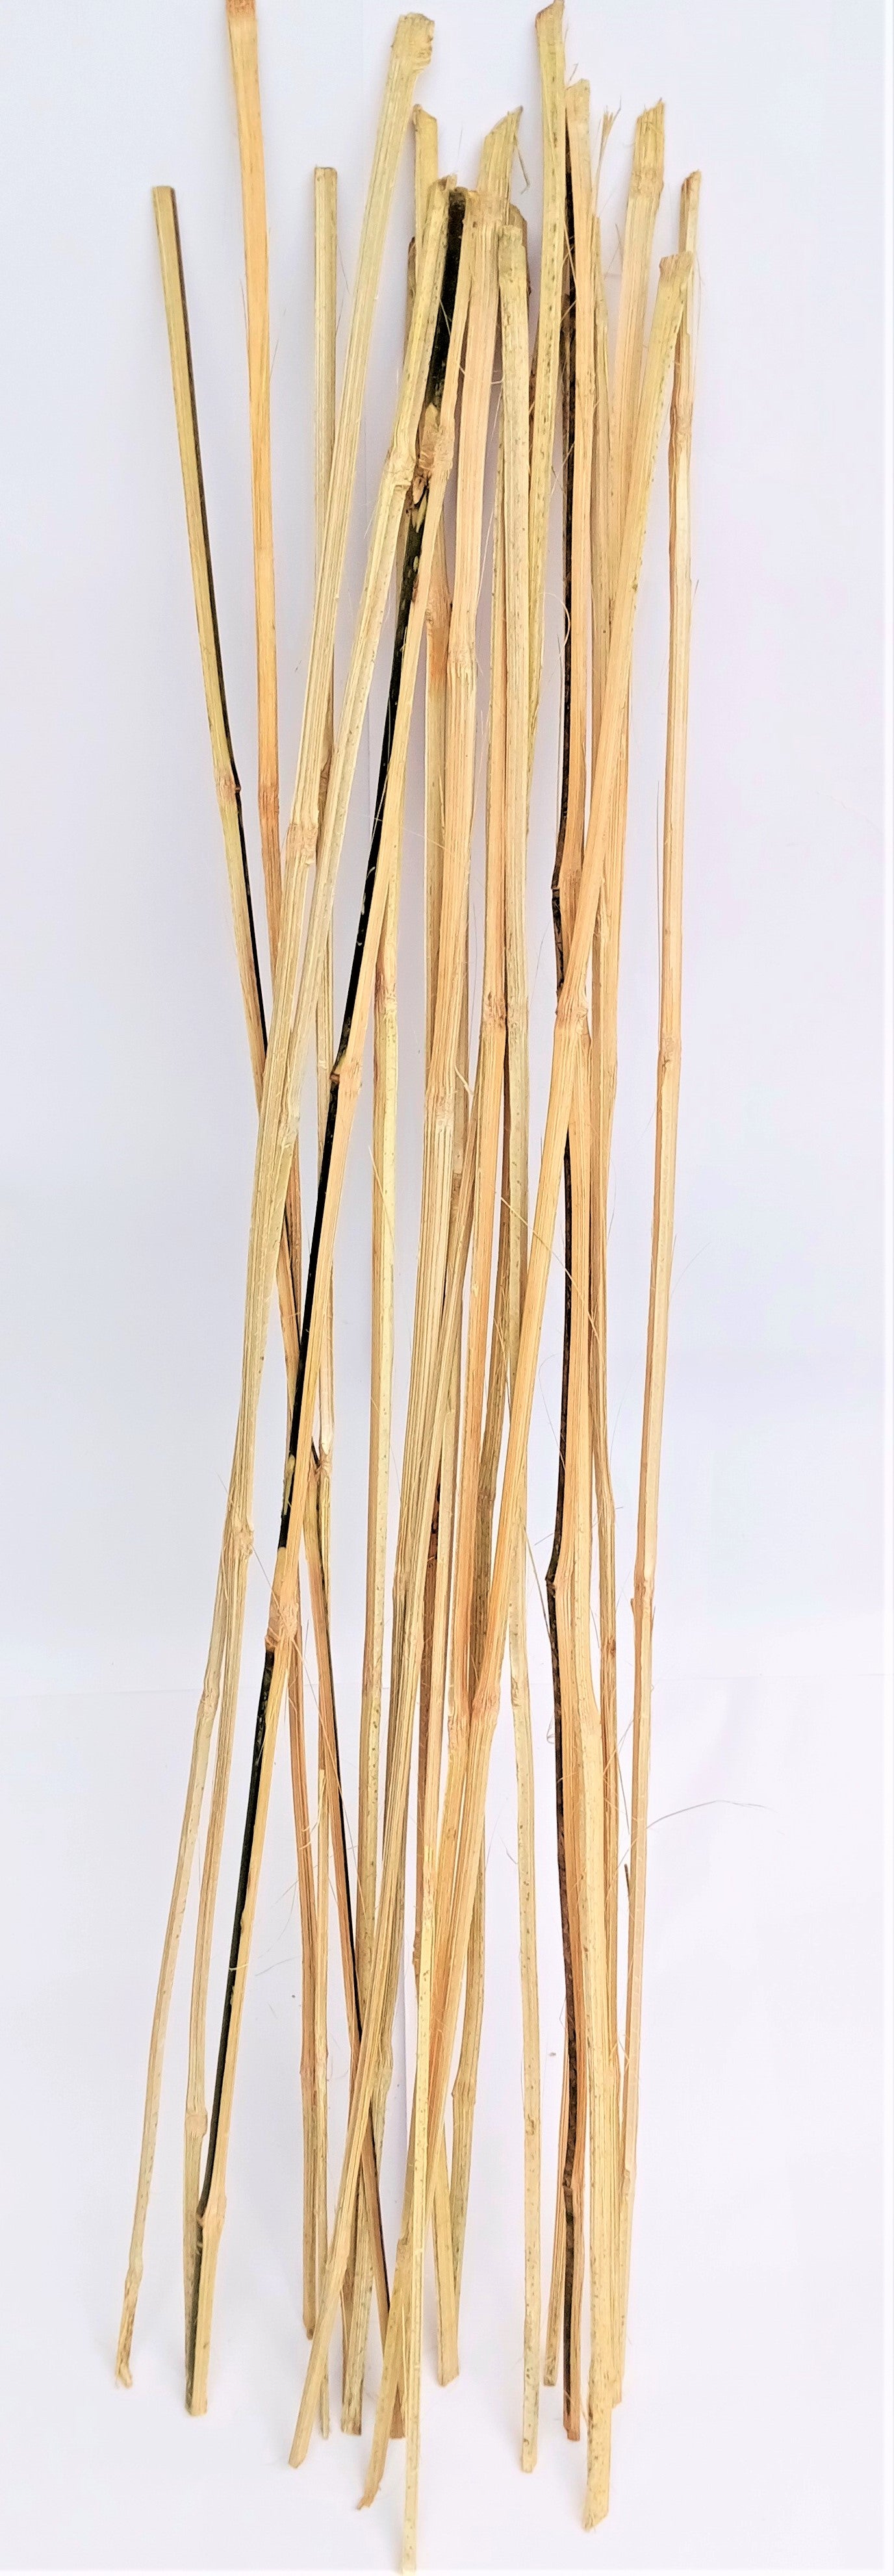 Bamboo Sticks for Plants Support (Set of 20) Sticks Size 3ft Used to Support Climbers Money Plant & Other Saplings